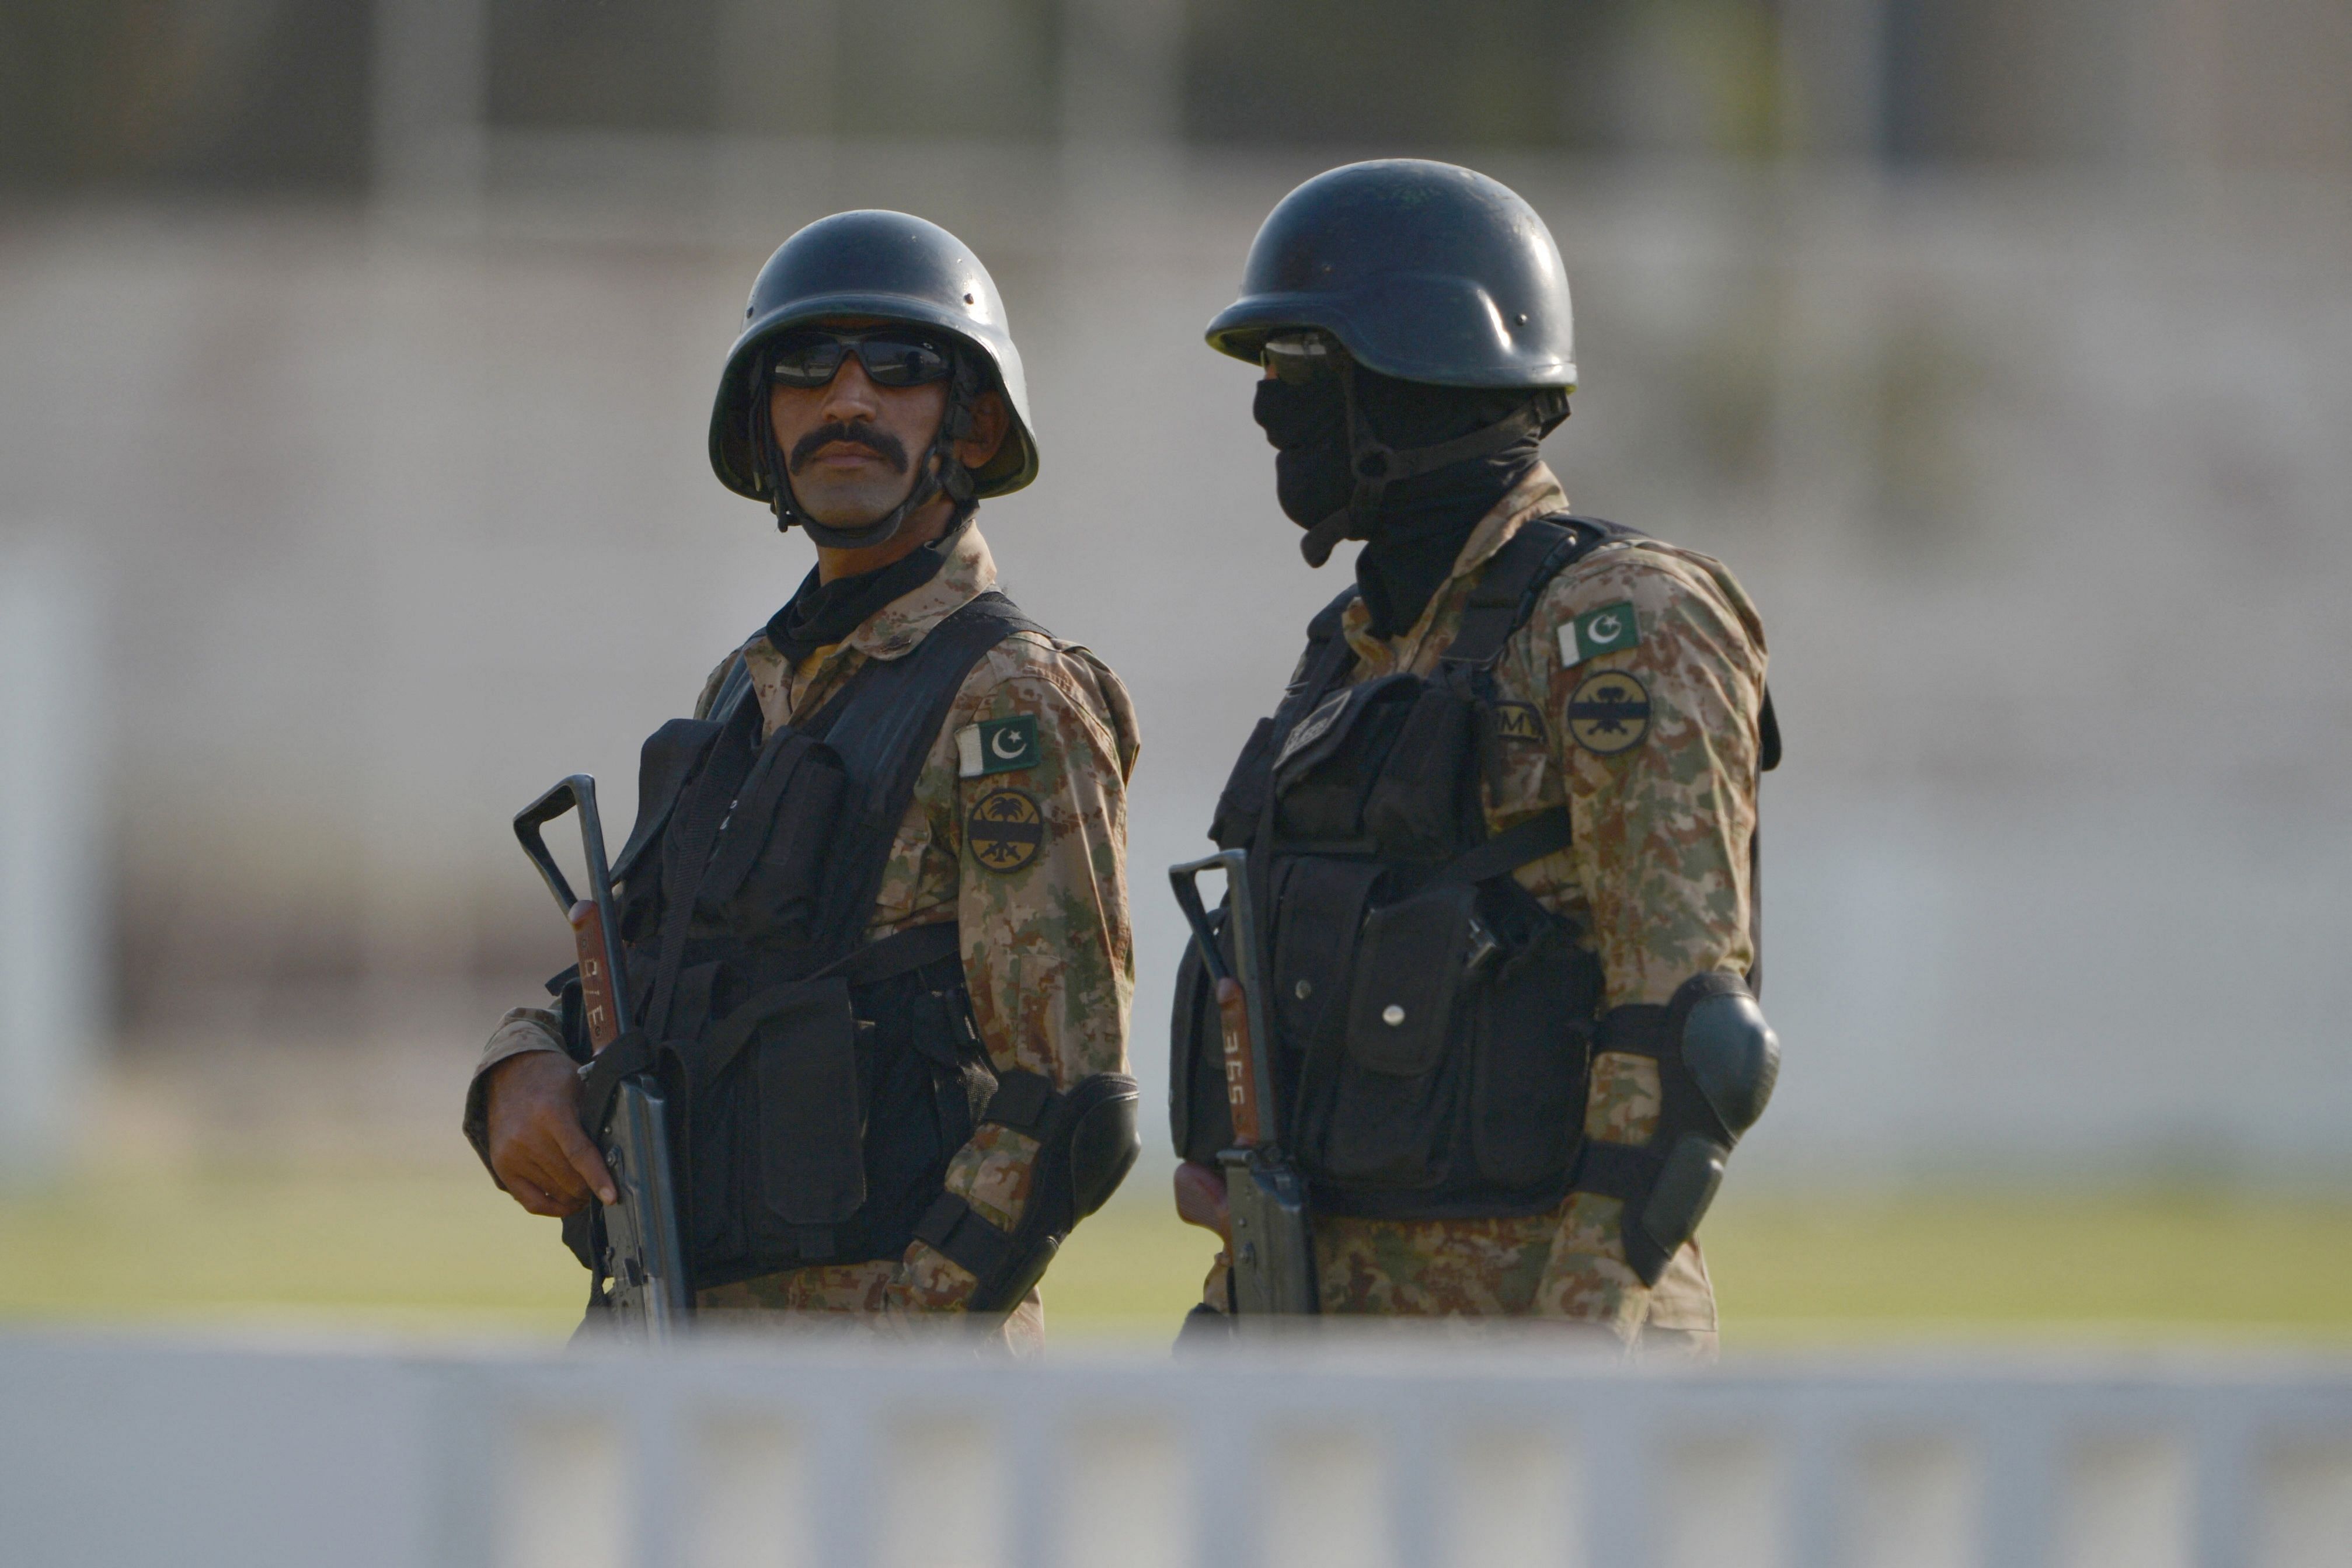 Pakistan Army troops patrol outside the National Cricket Stadium in Karachi. Credit: AFP Photo